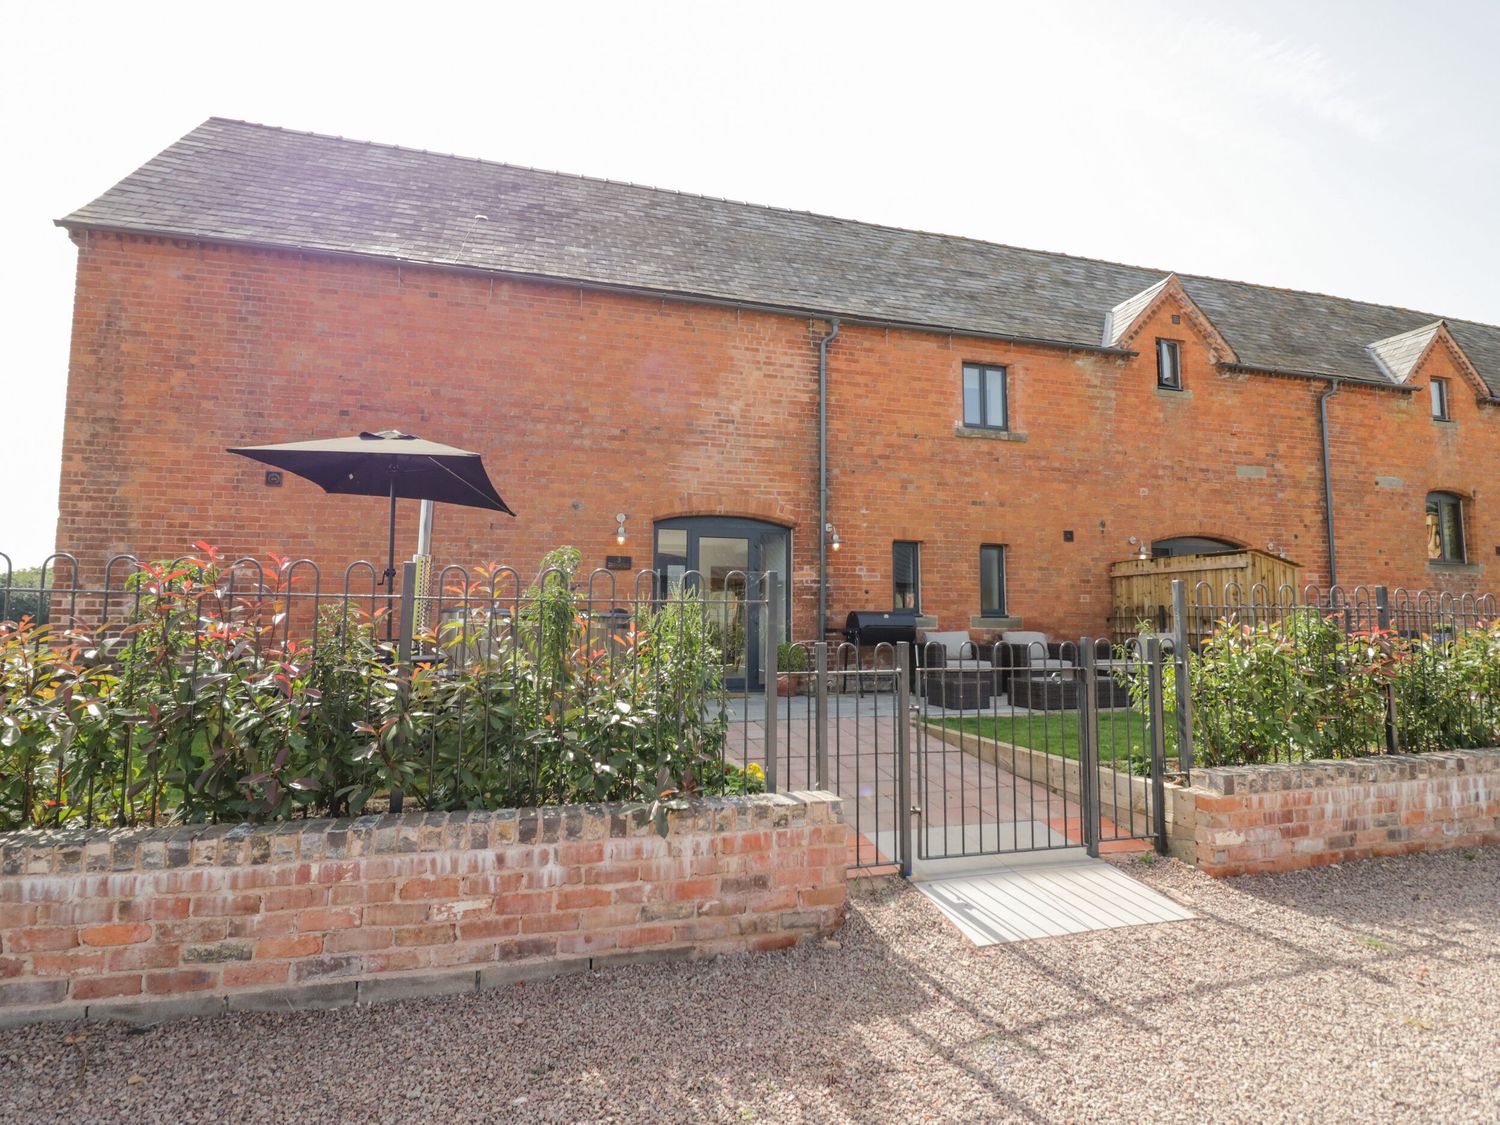 Plough Share, Huntley, Gloucestershire. Barn conversion. Contemporary. Wood-fired hot tub. Two pets.